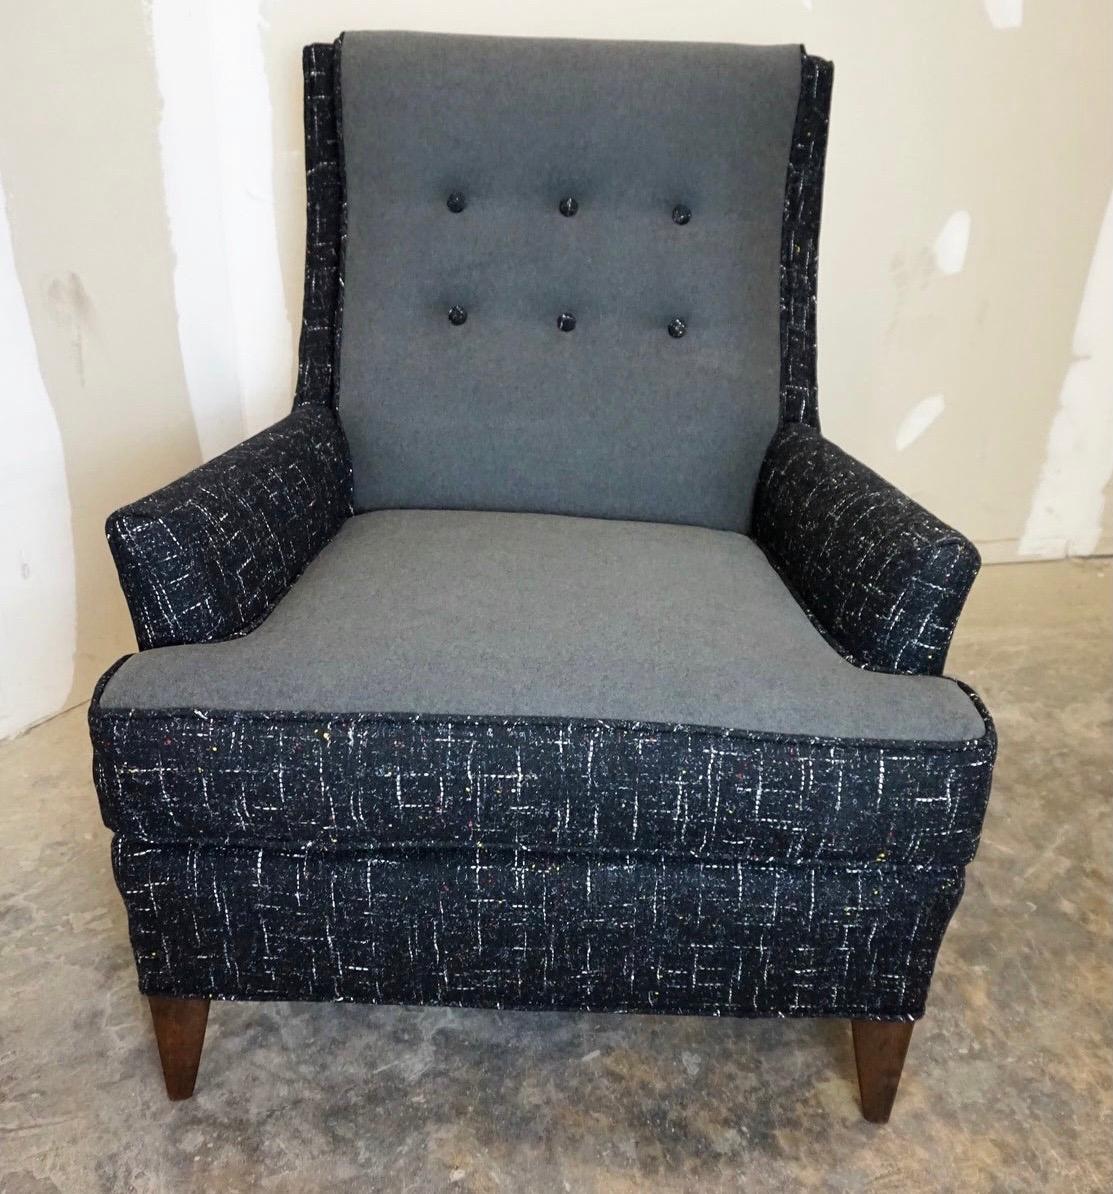 Produced in the mid-1950s in high point, N.C. by Erwin Lambeth, this club chair has been newly upholstered in a wool flannel fabric along with a more contemporary sensuede - se pics. Now, more than ever, home is where the heart is.